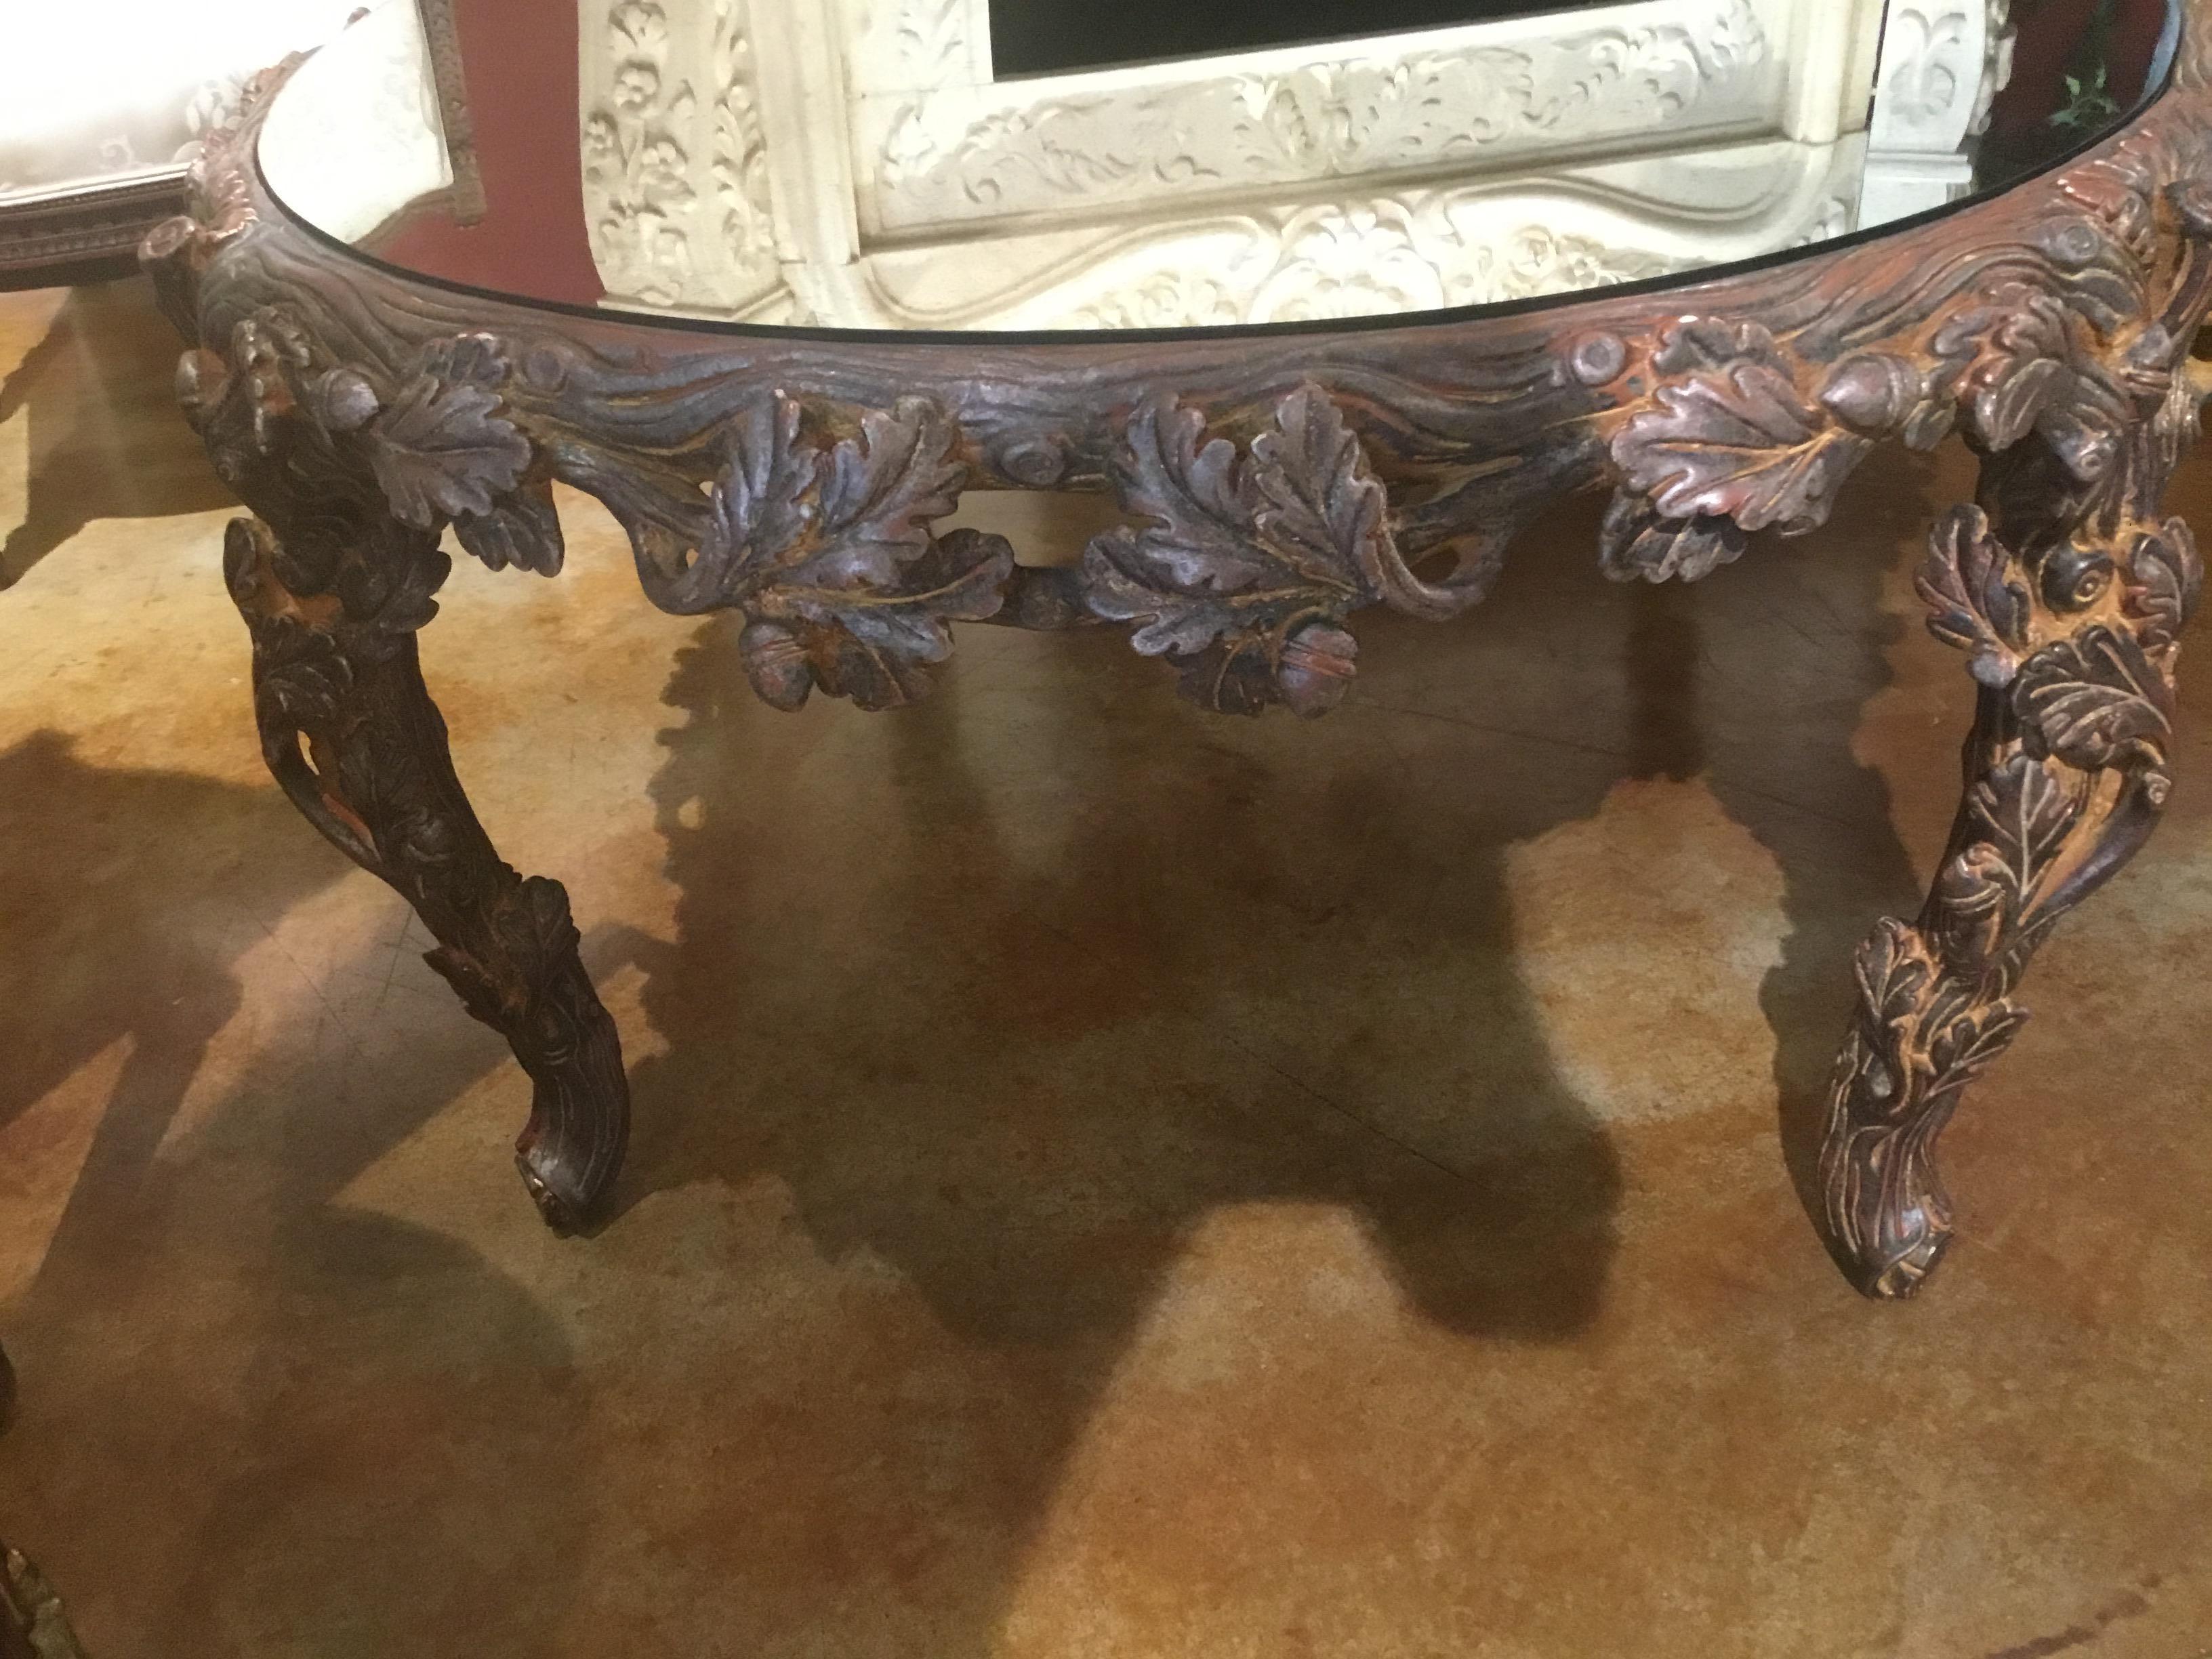 Mirror-top oblong coffee table made in metal with a faux bois design
with an oak leaf and acorn motif, 20th century. The top is a mirrored bronze with
antiqued finish.
 